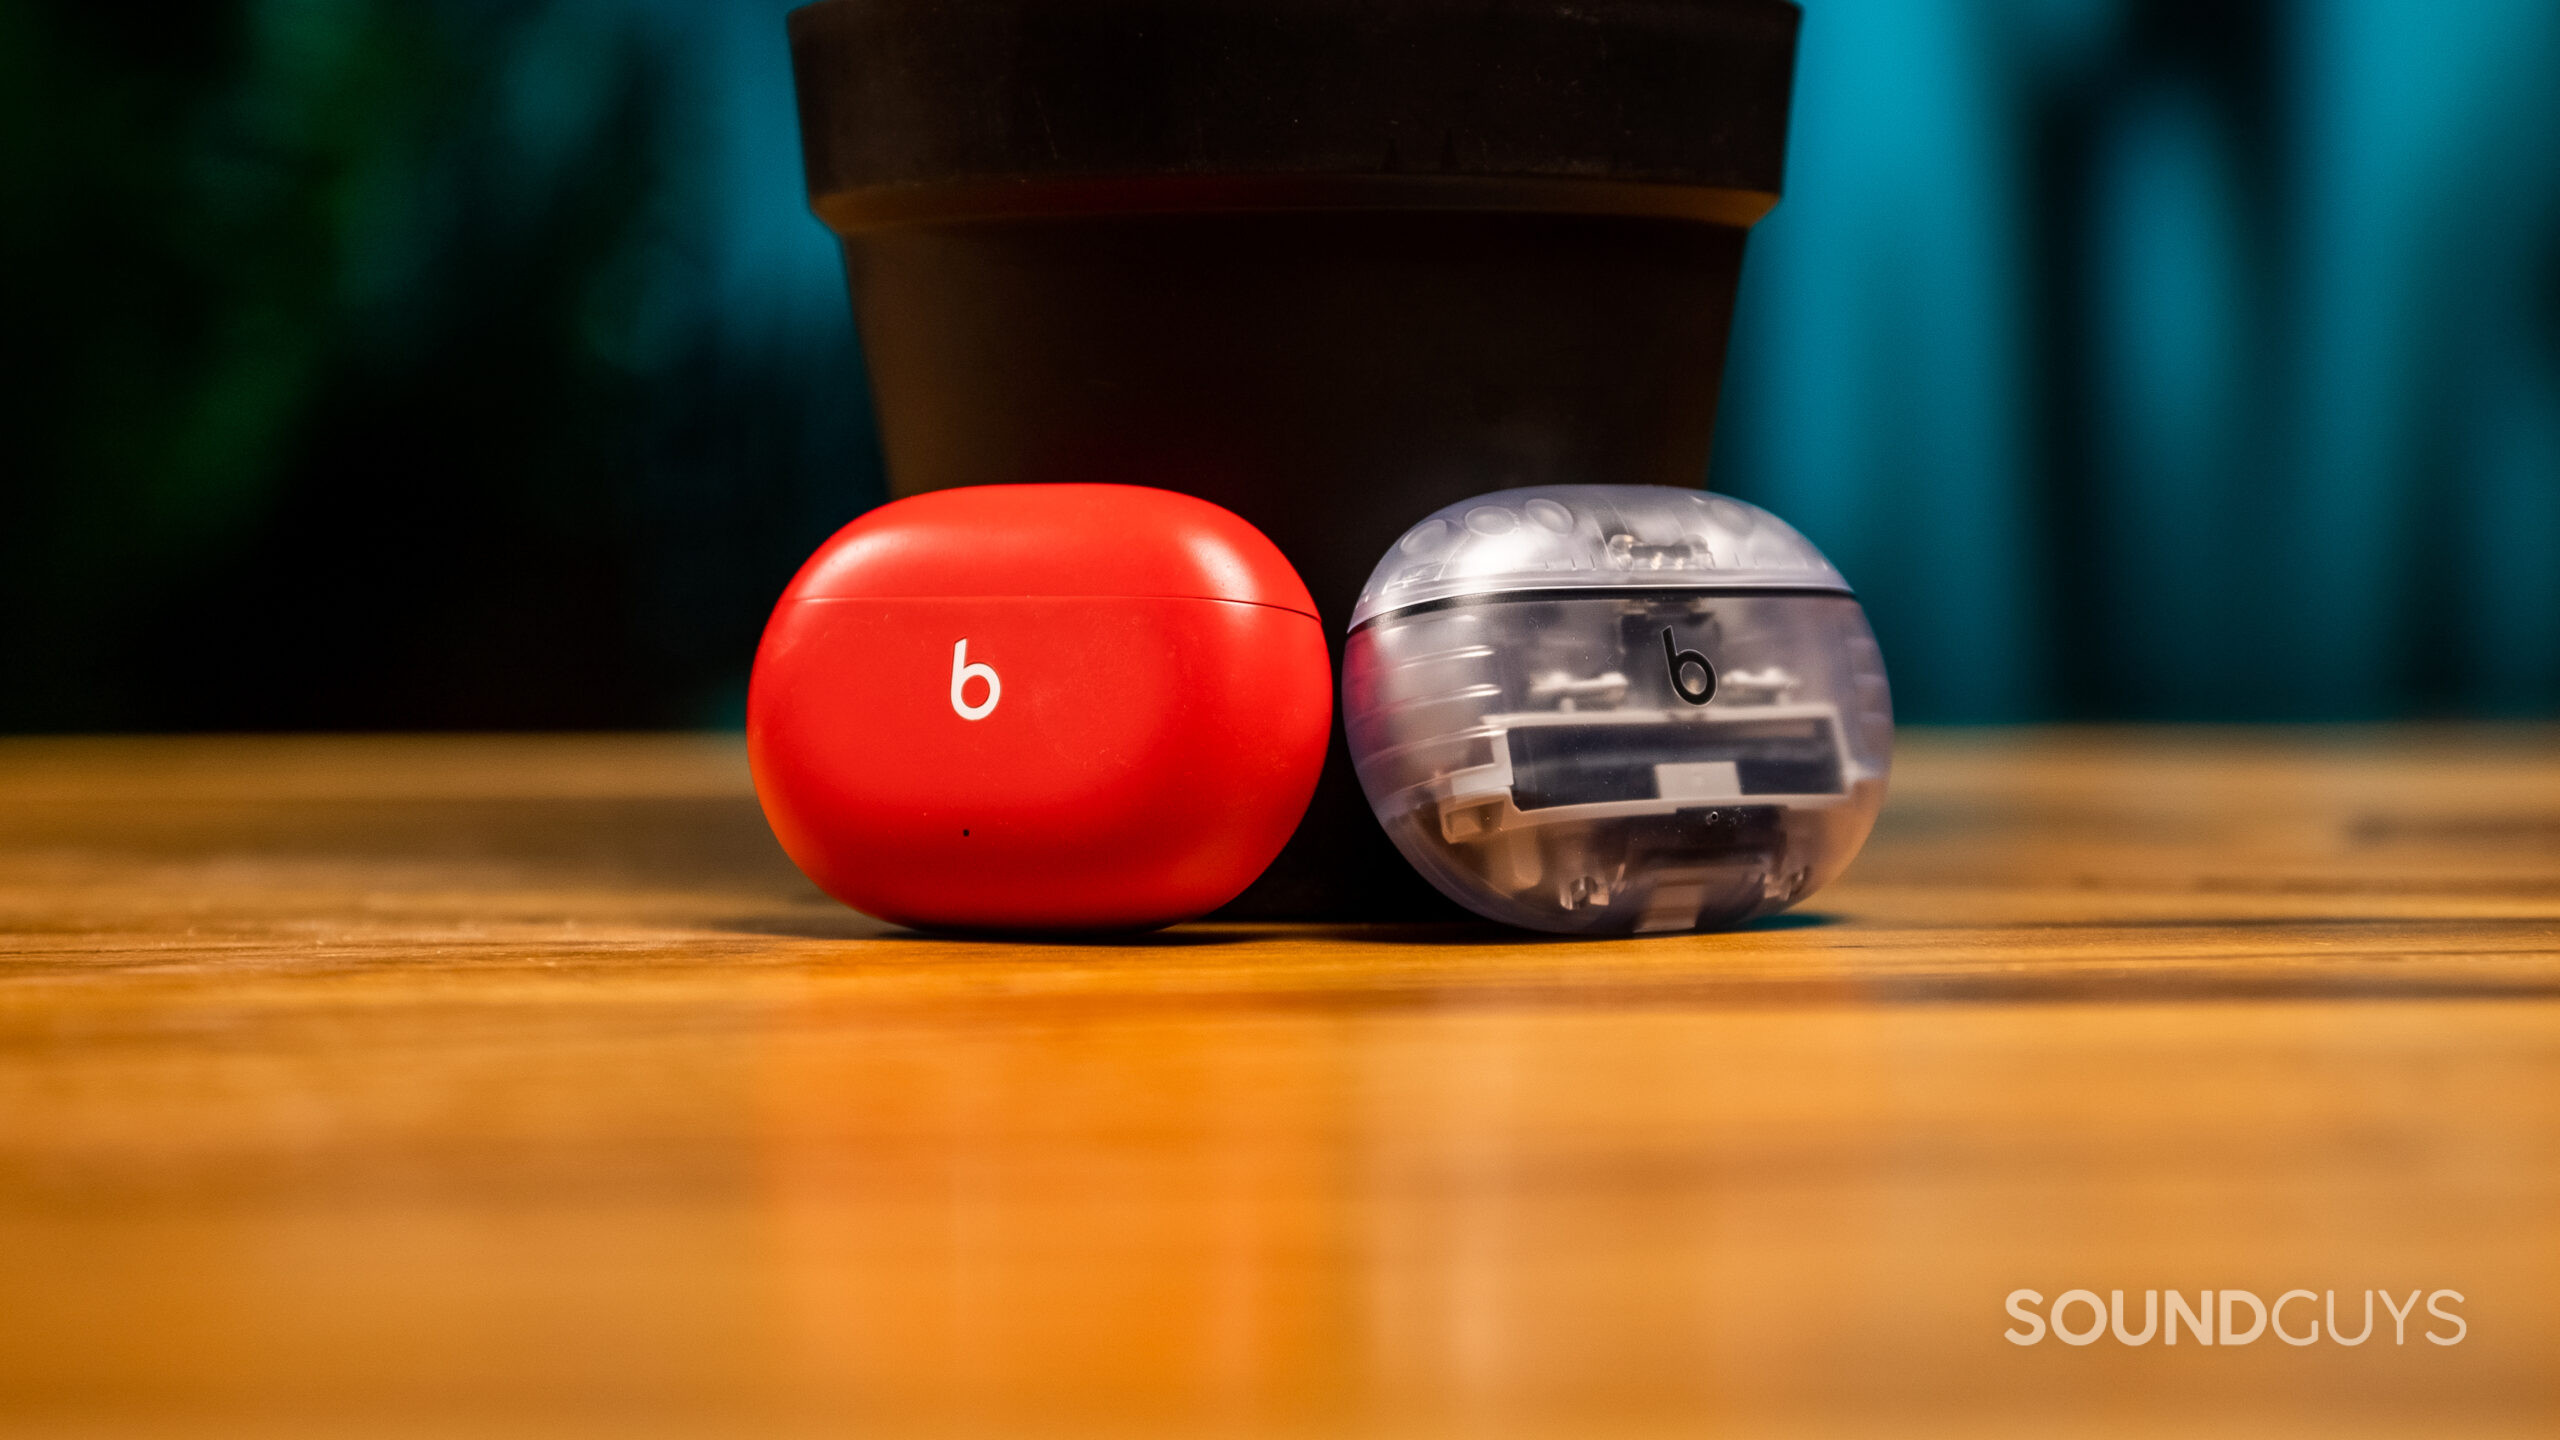 The Beats Studio Buds and Studio Buds Plus cases lean against a plant pot.